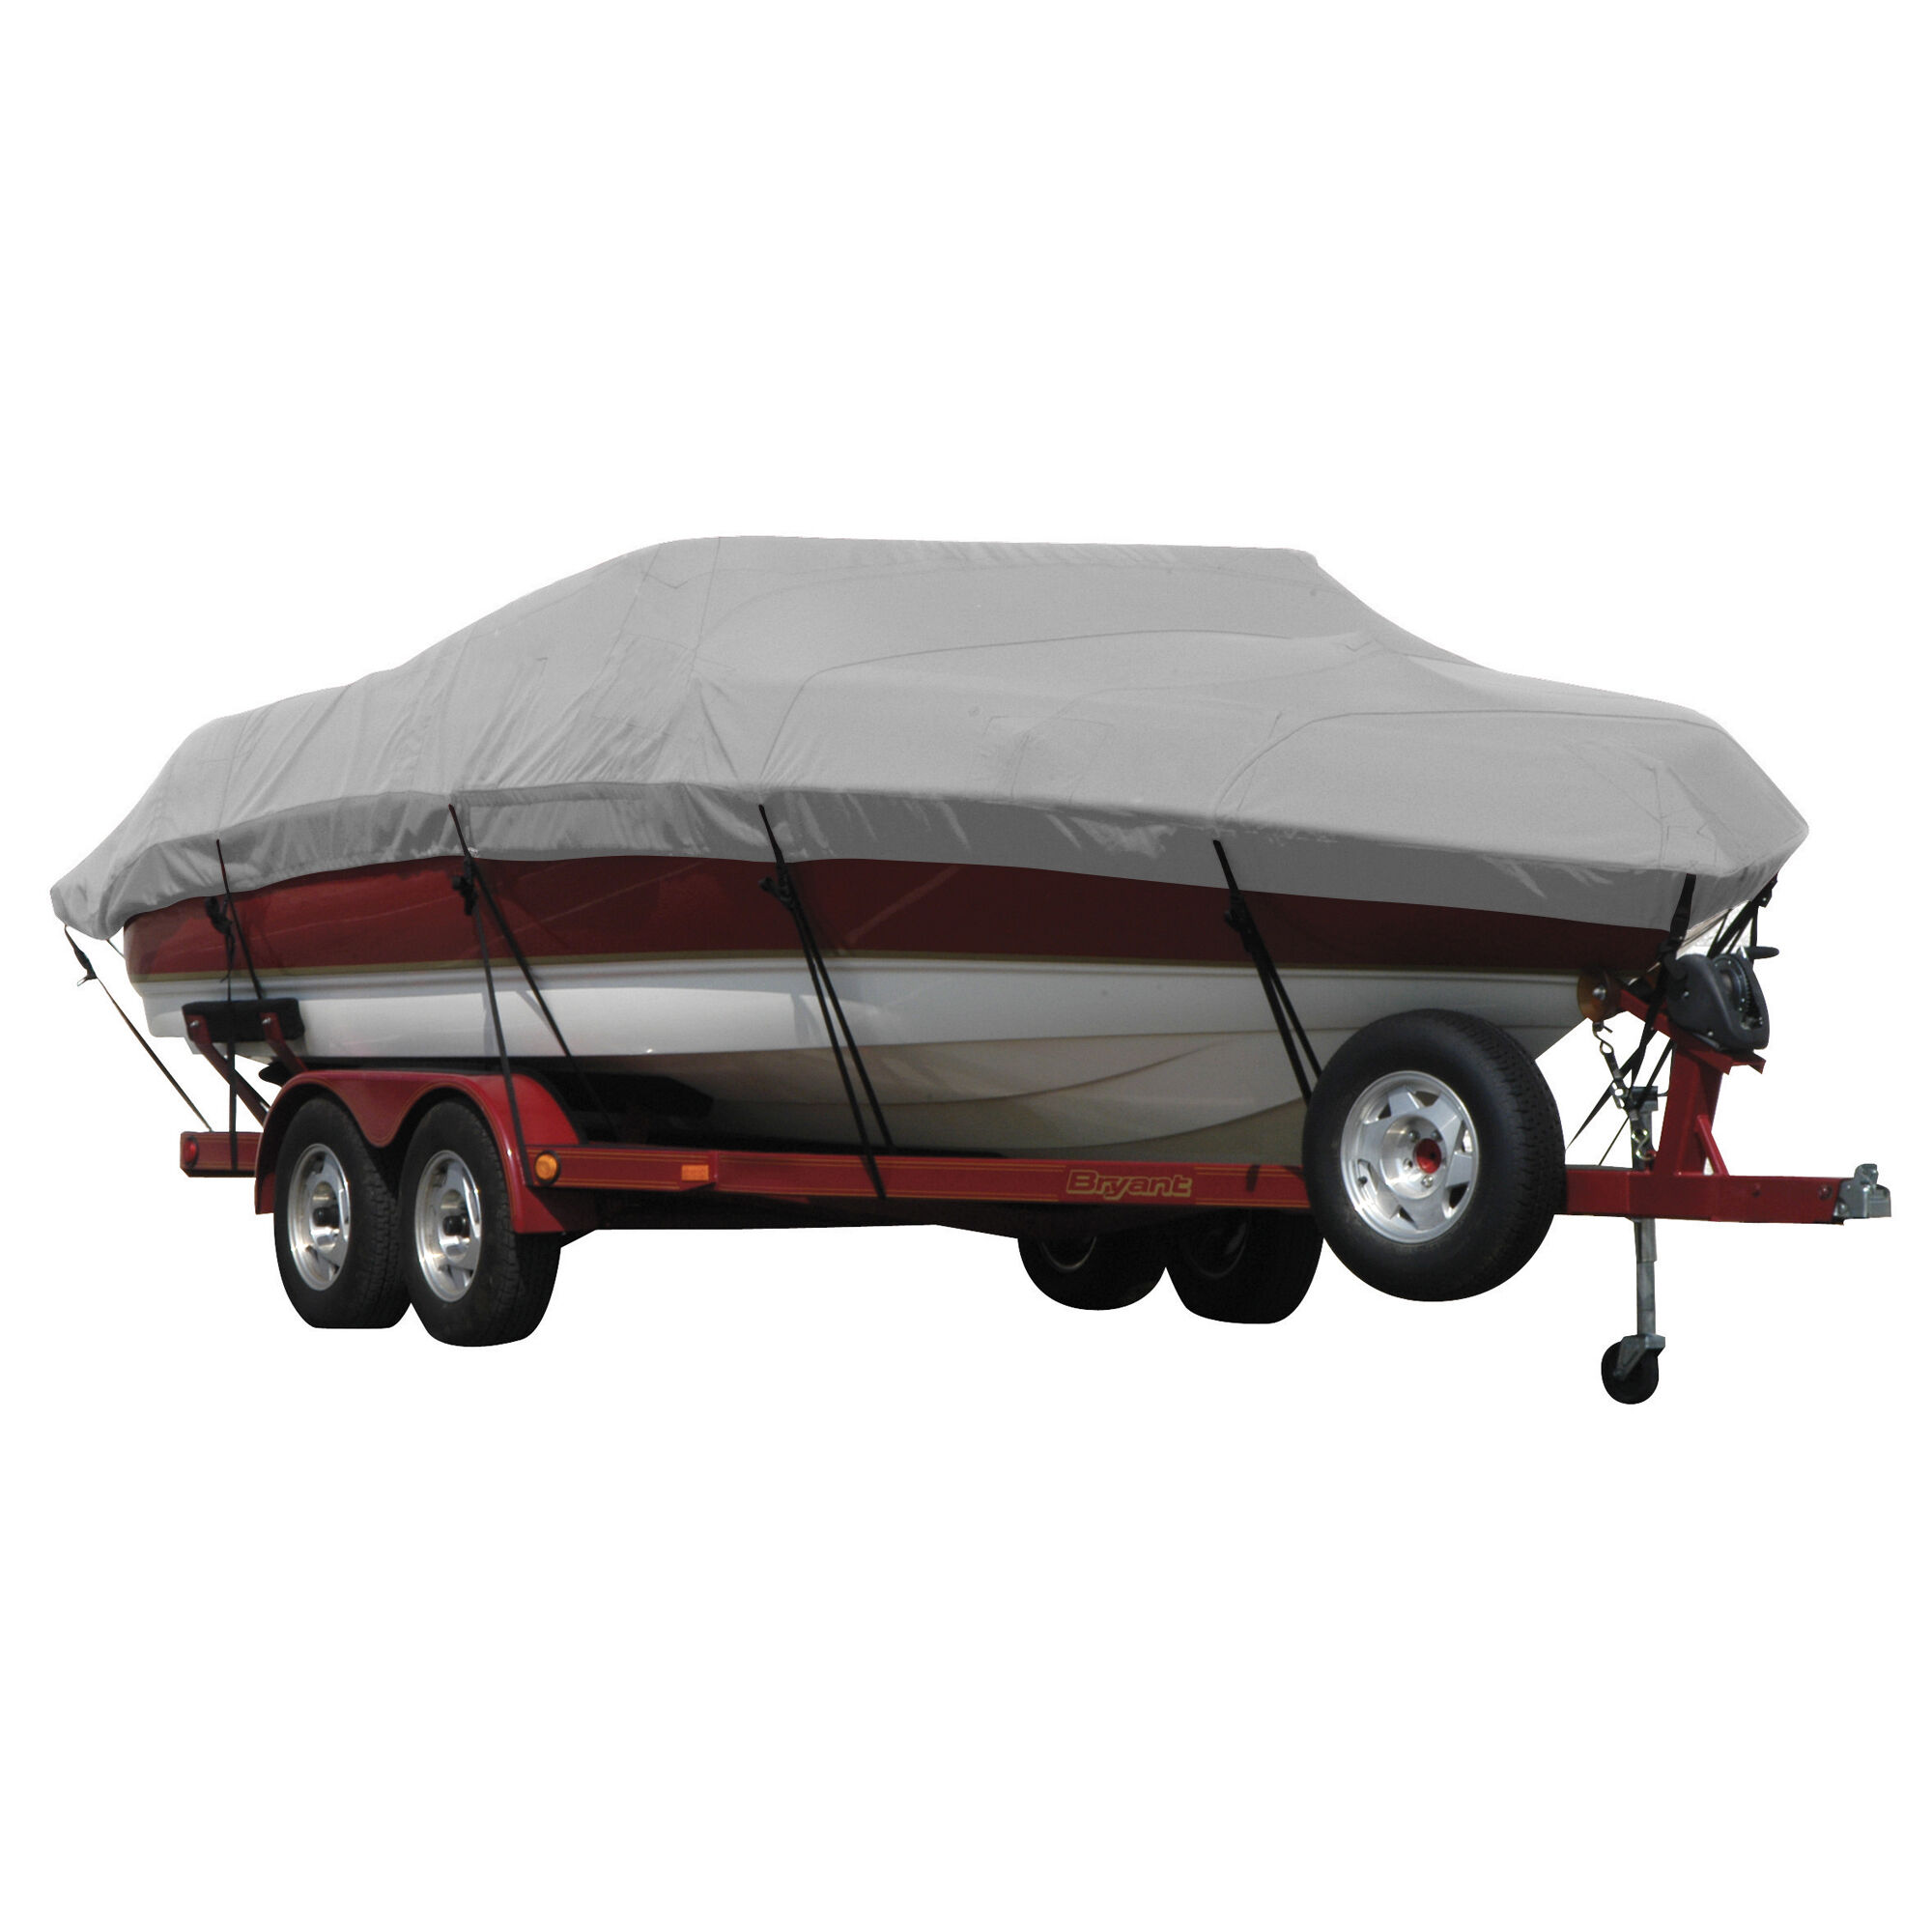 Covermate Sunbrella Boat Cover For Moomba Boomerang Cb (Does Not Cover PLATFORMm) in Grey